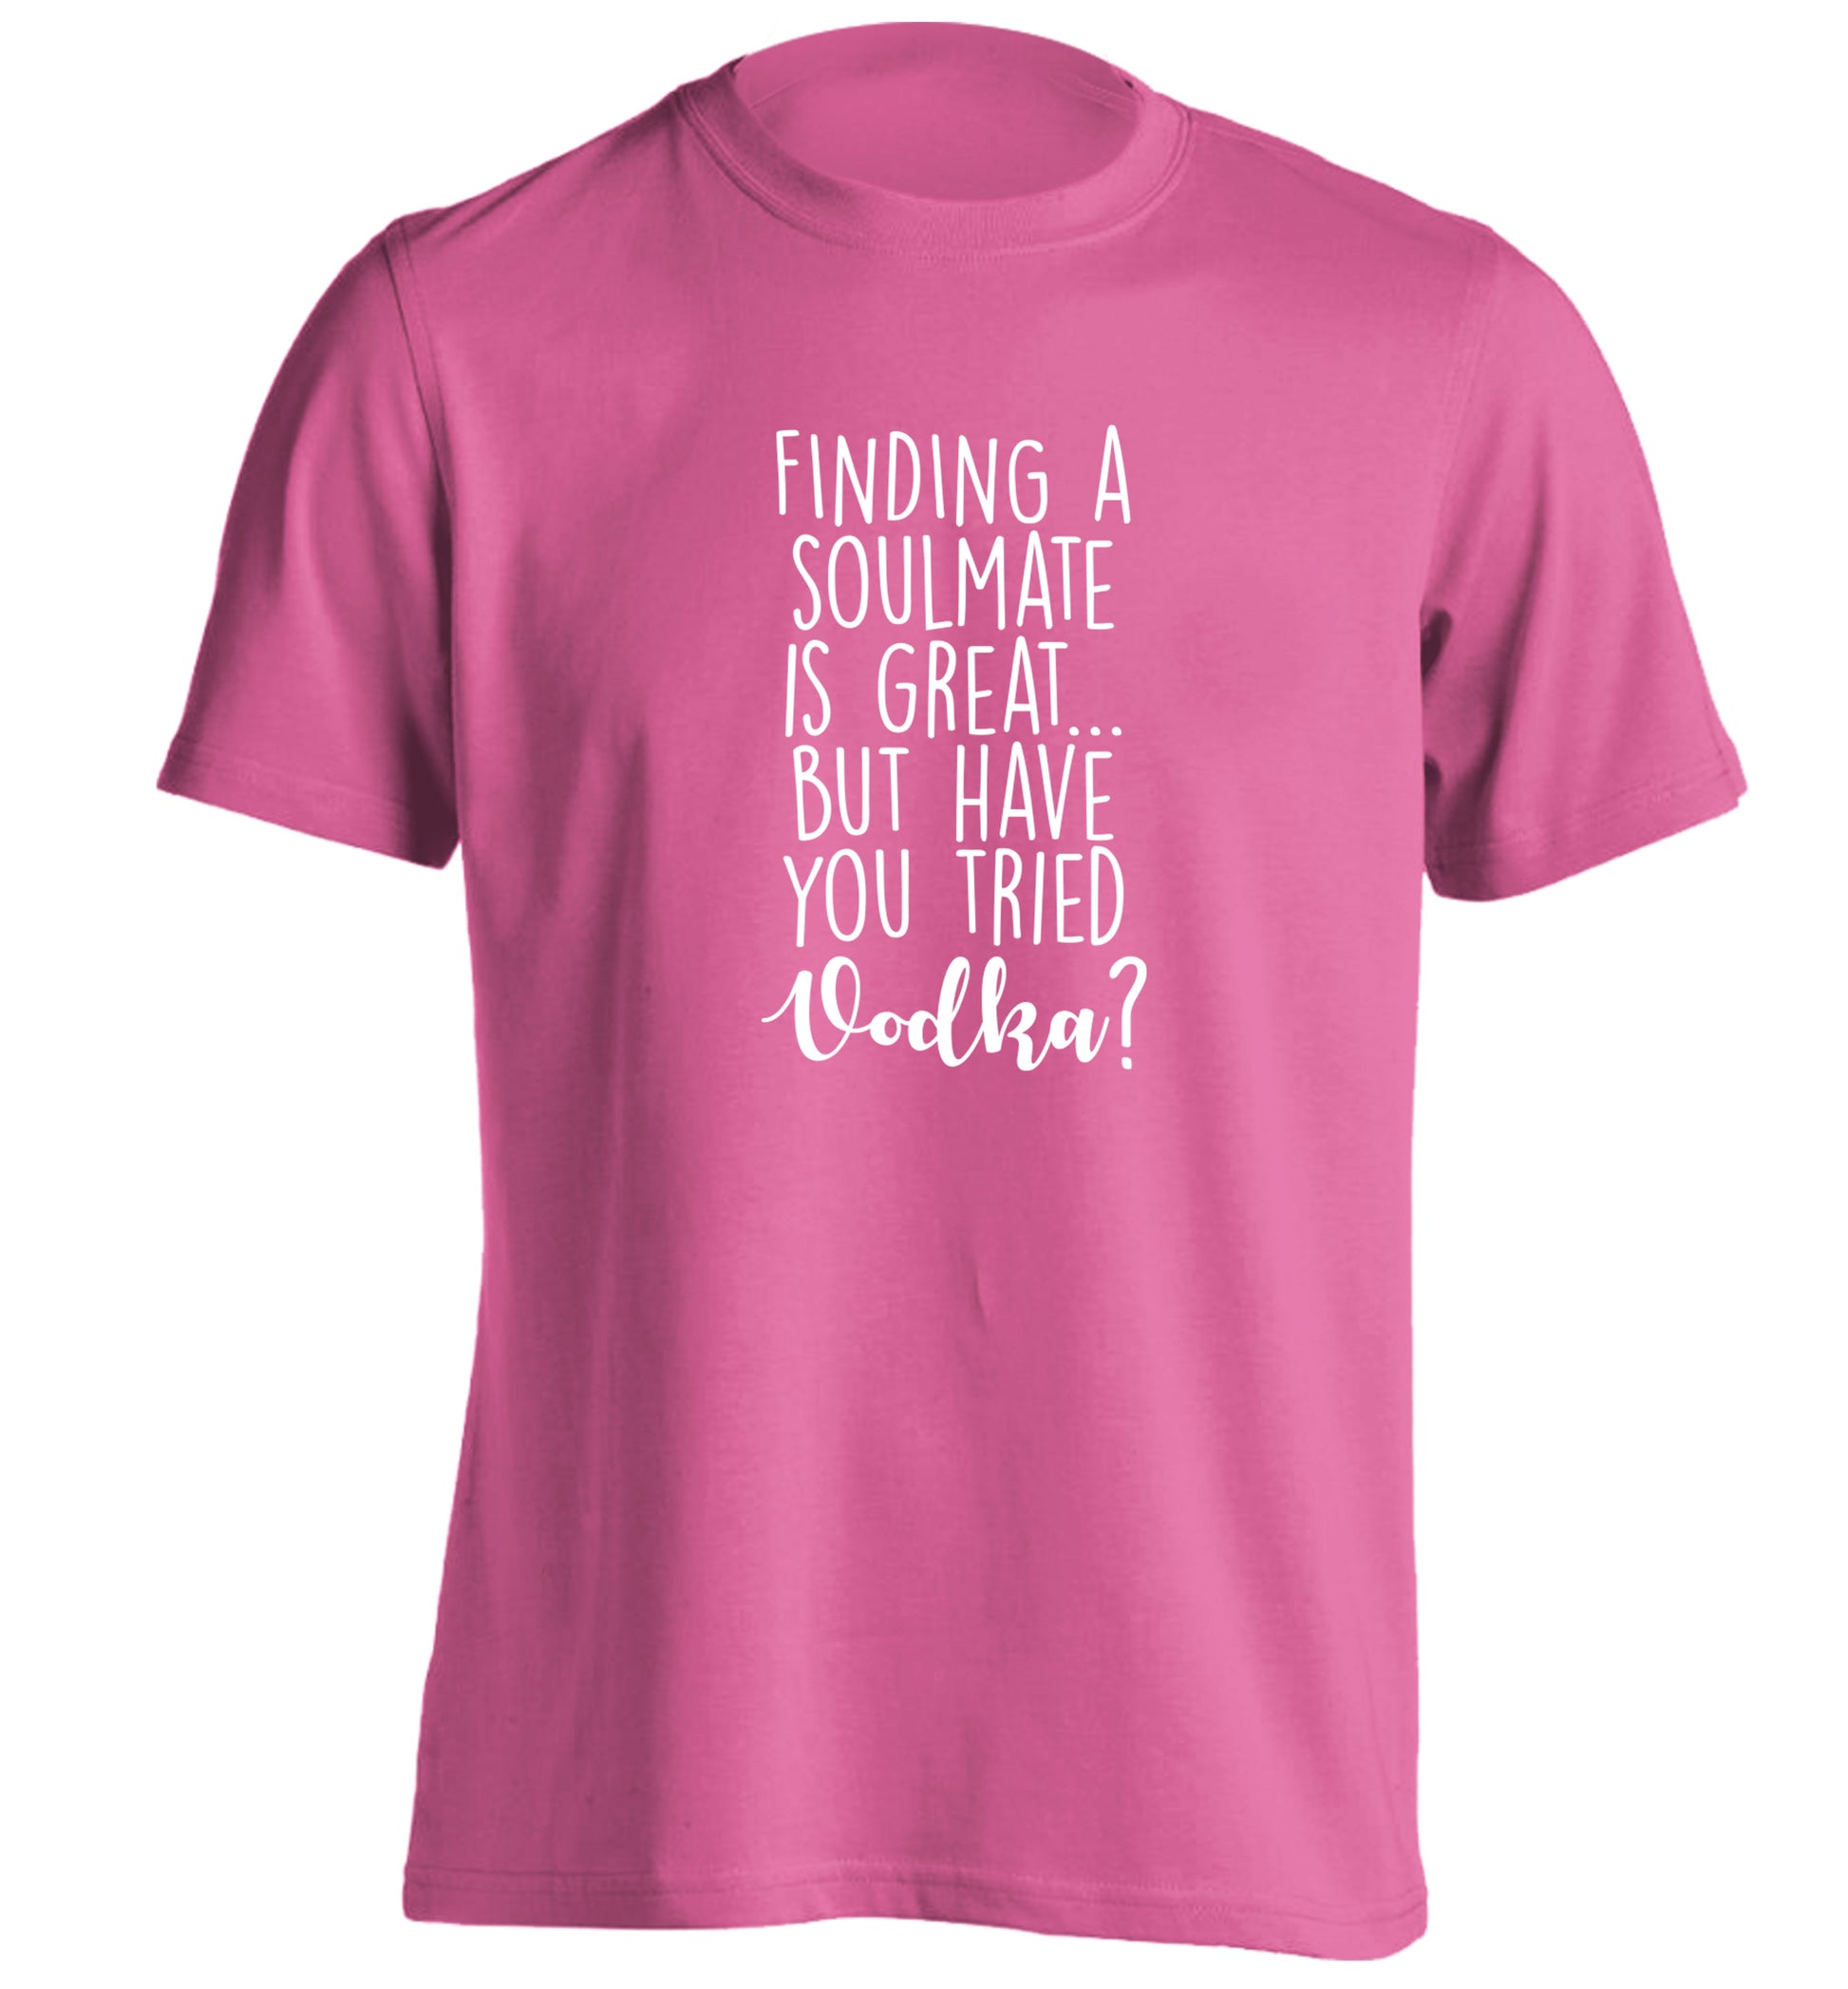 Finding a soulmate is great but have you tried vodka? adults unisex pink Tshirt 2XL